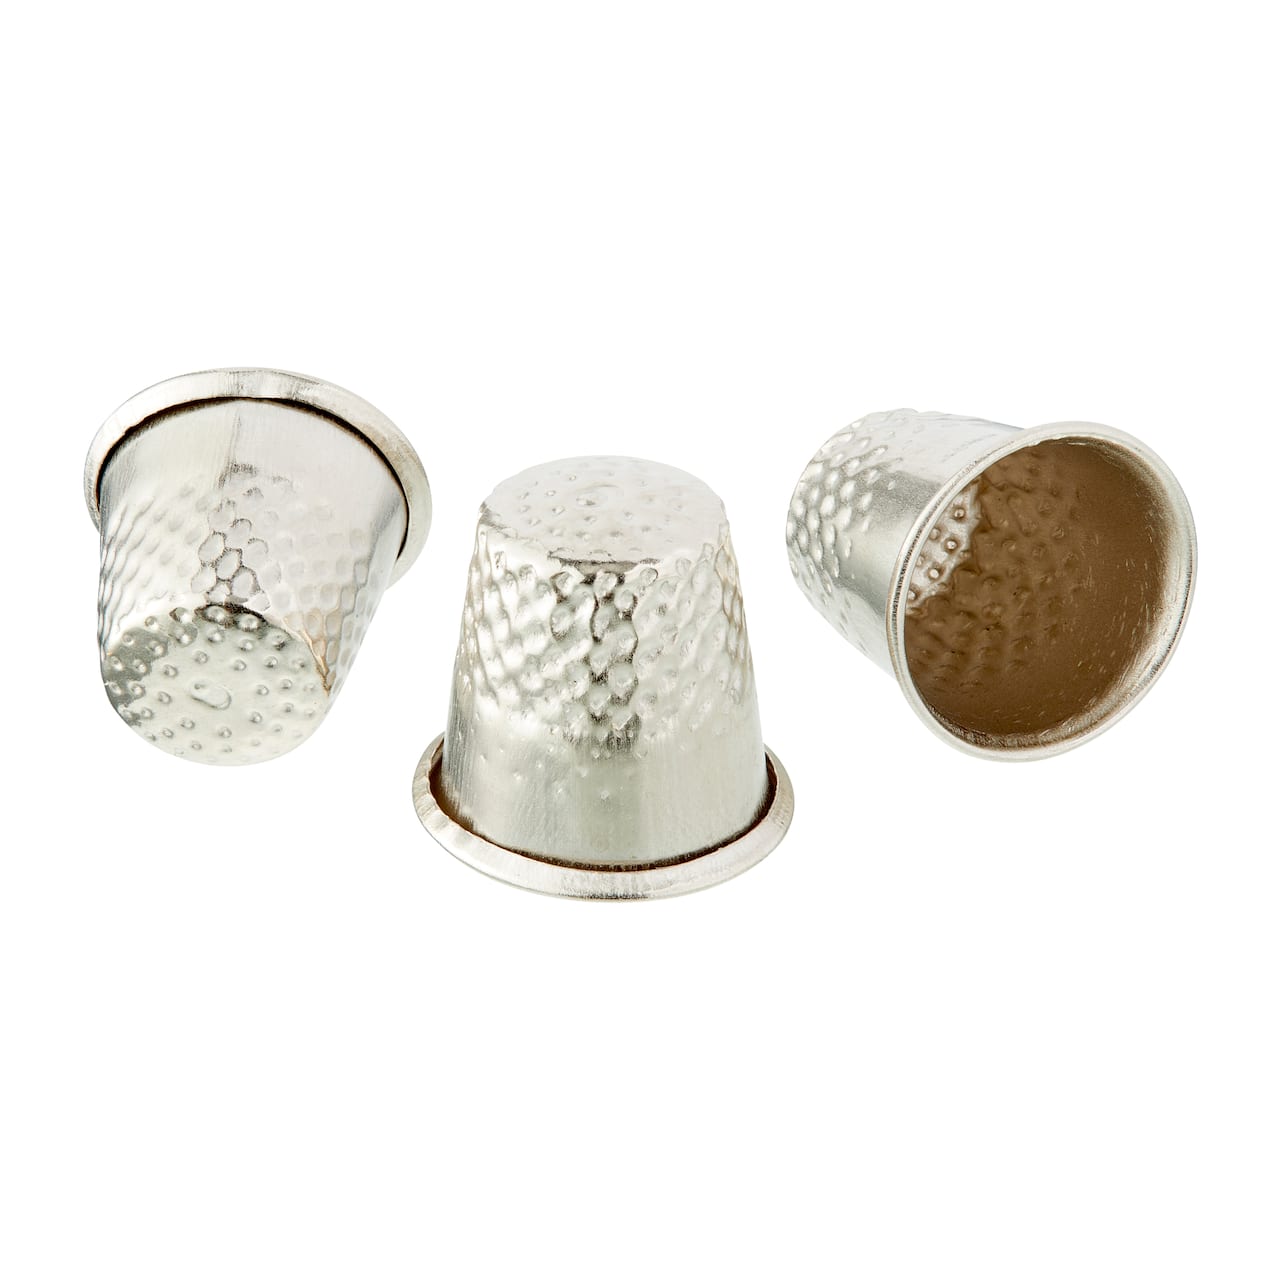 36 Packs: 3 ct. (108 total) Thimbles by Loops & Threads™